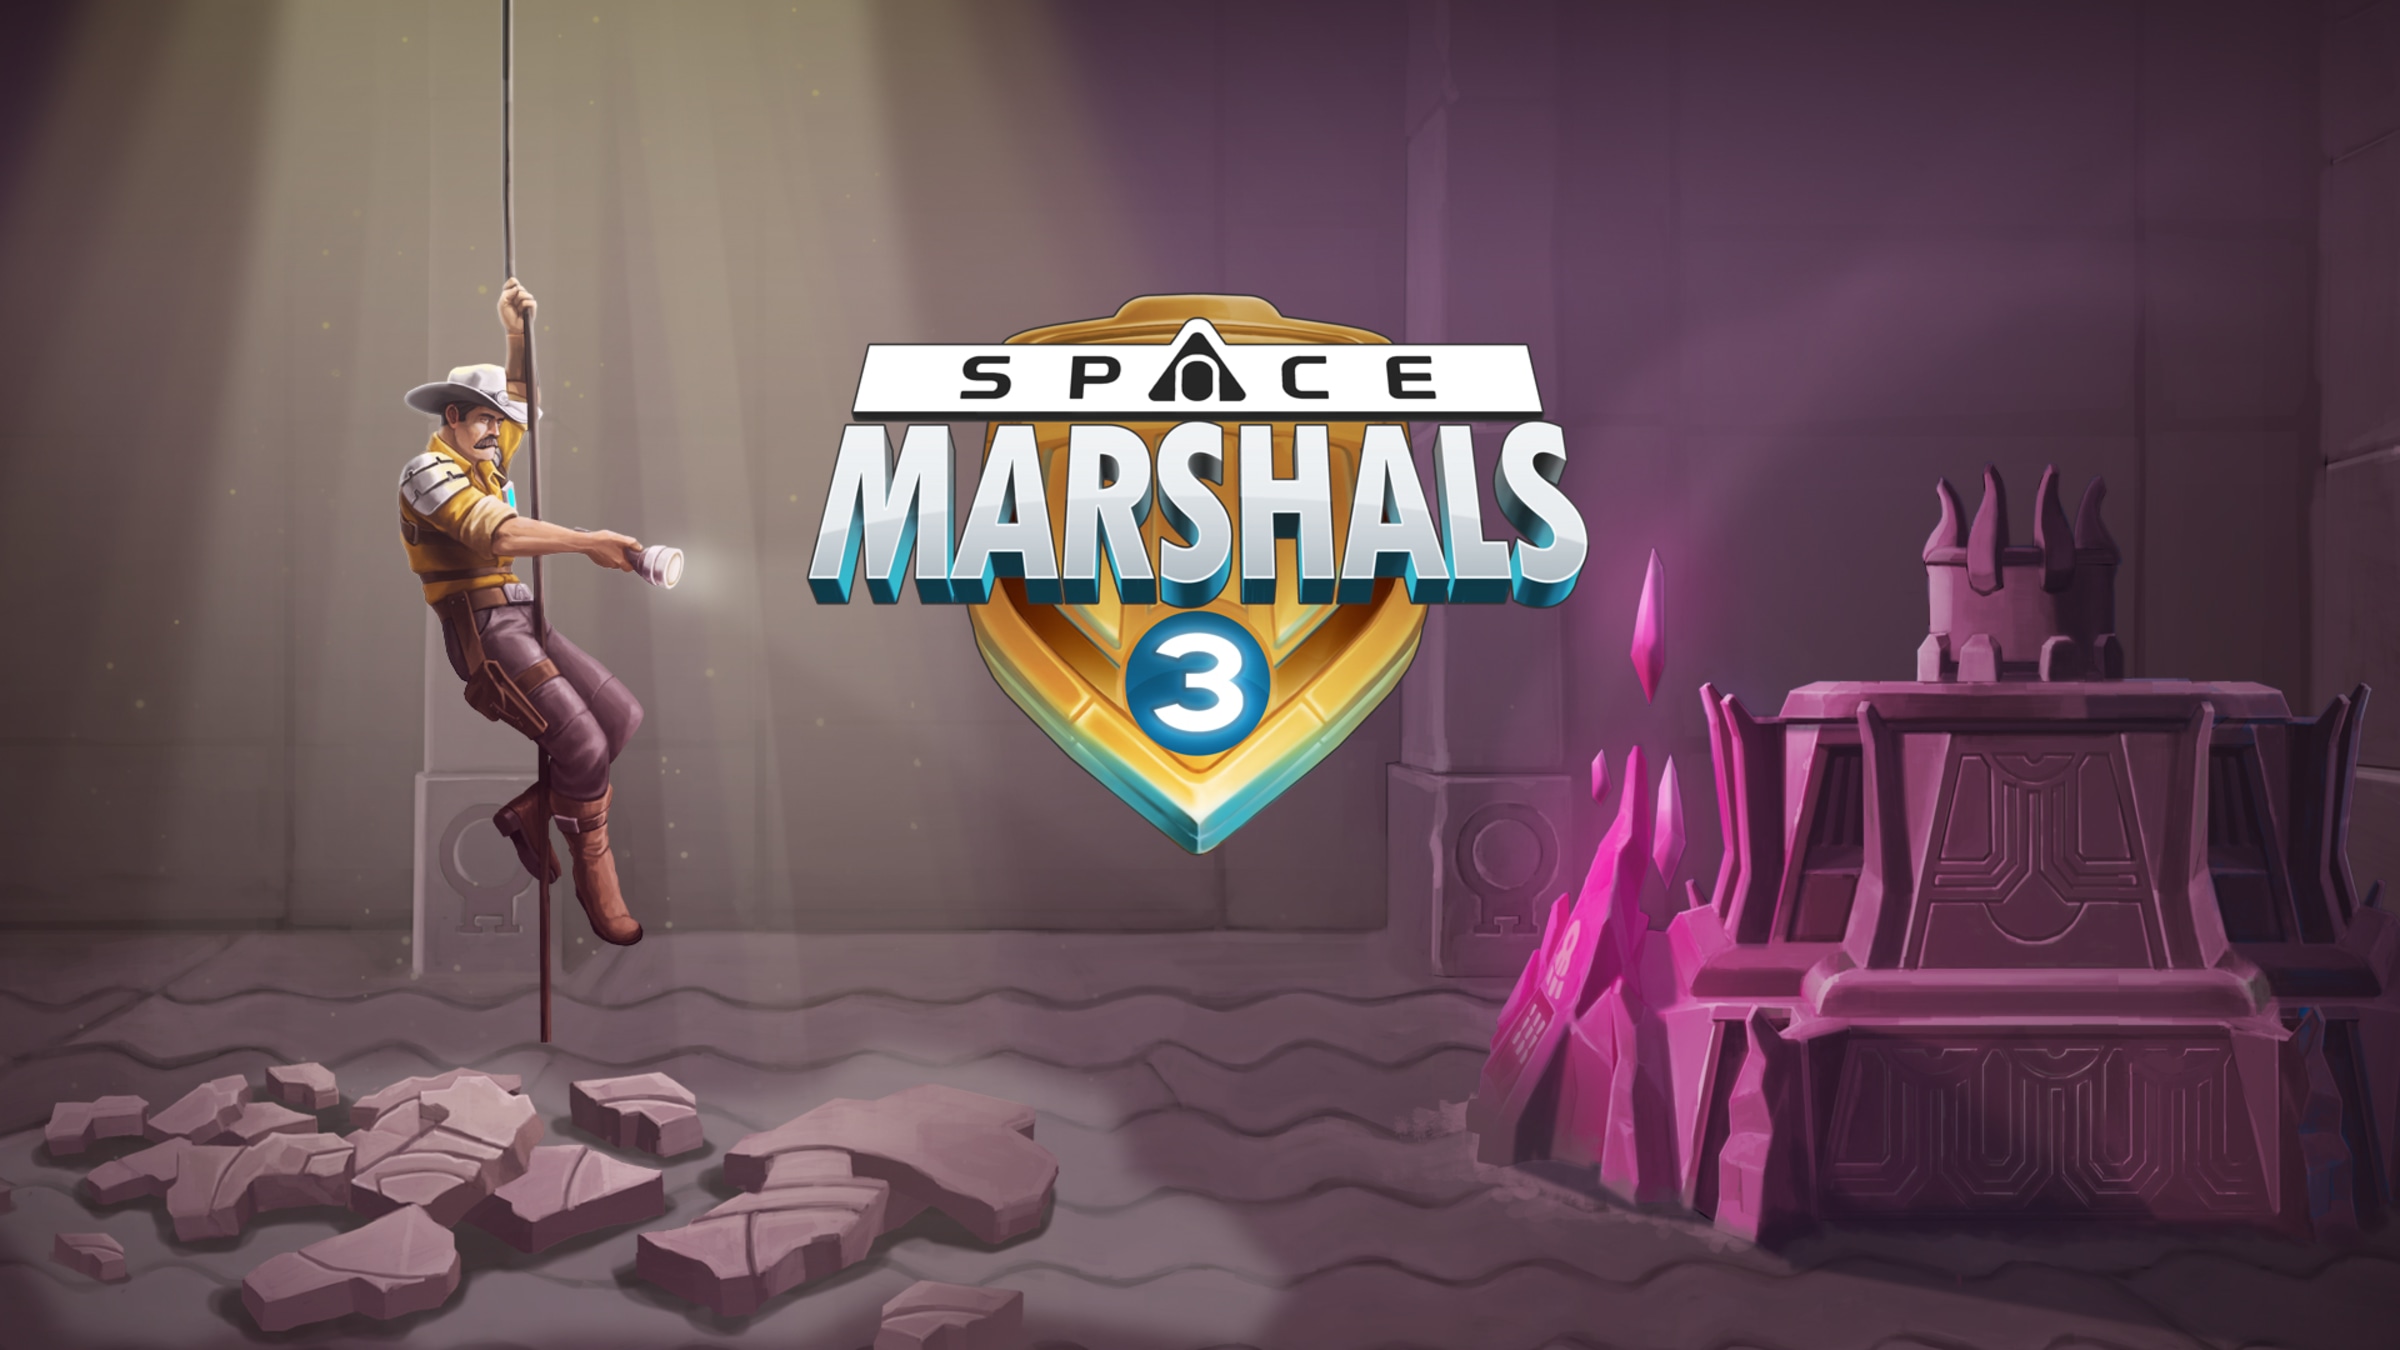 Space Marshals 3 For Nintendo Switch - Nintendo Official Site